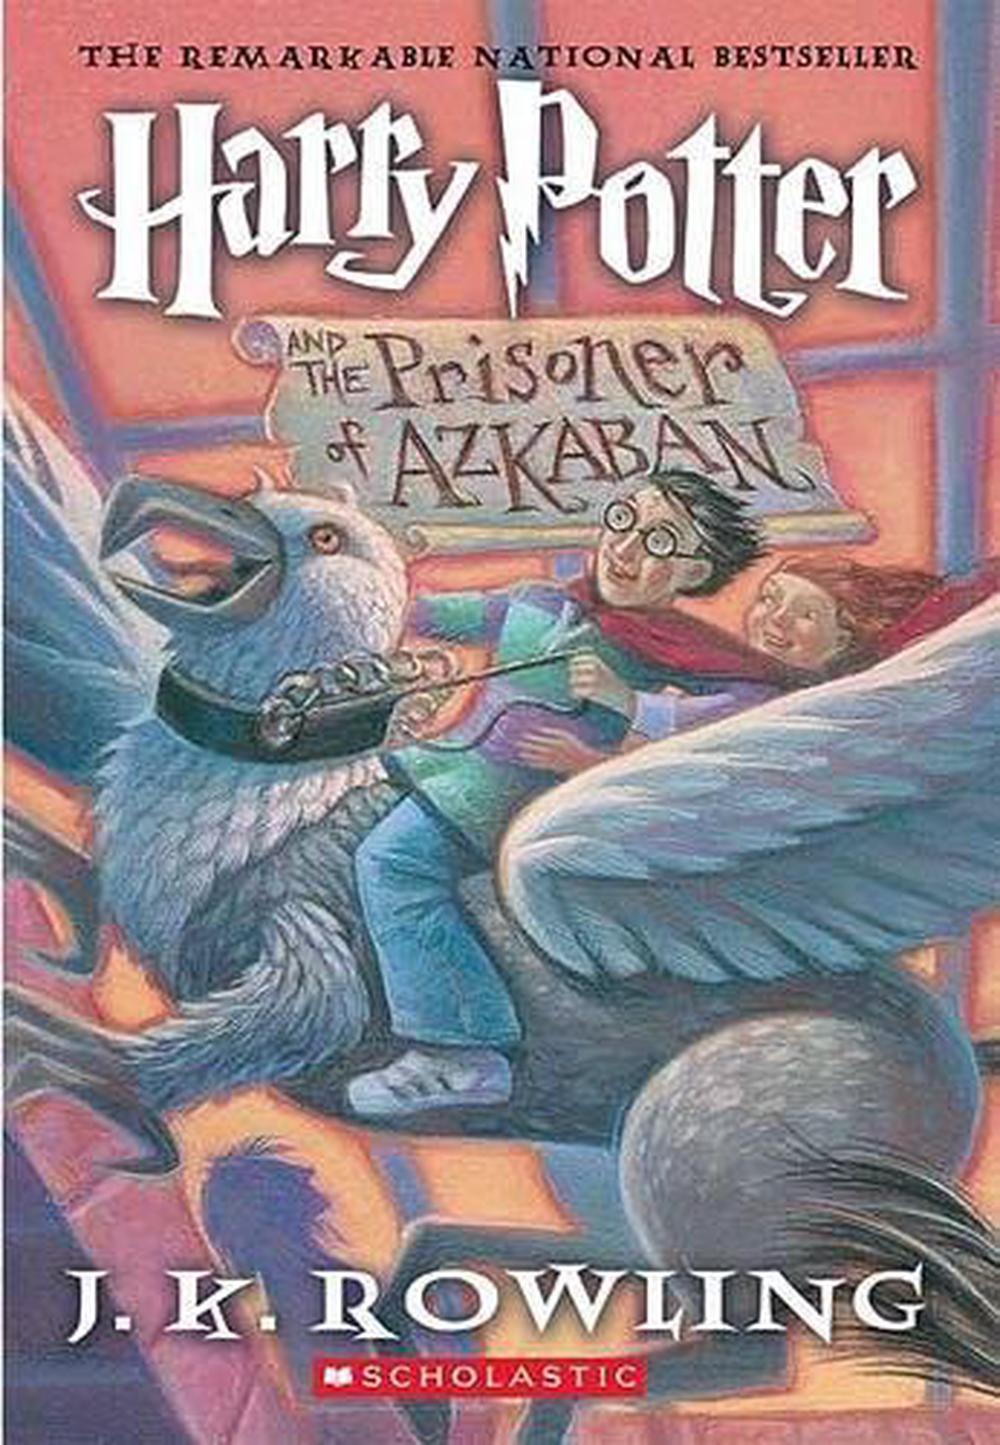 Harry Potter And The Prisoner Of Azkaban By Jk Rowling Hardcover